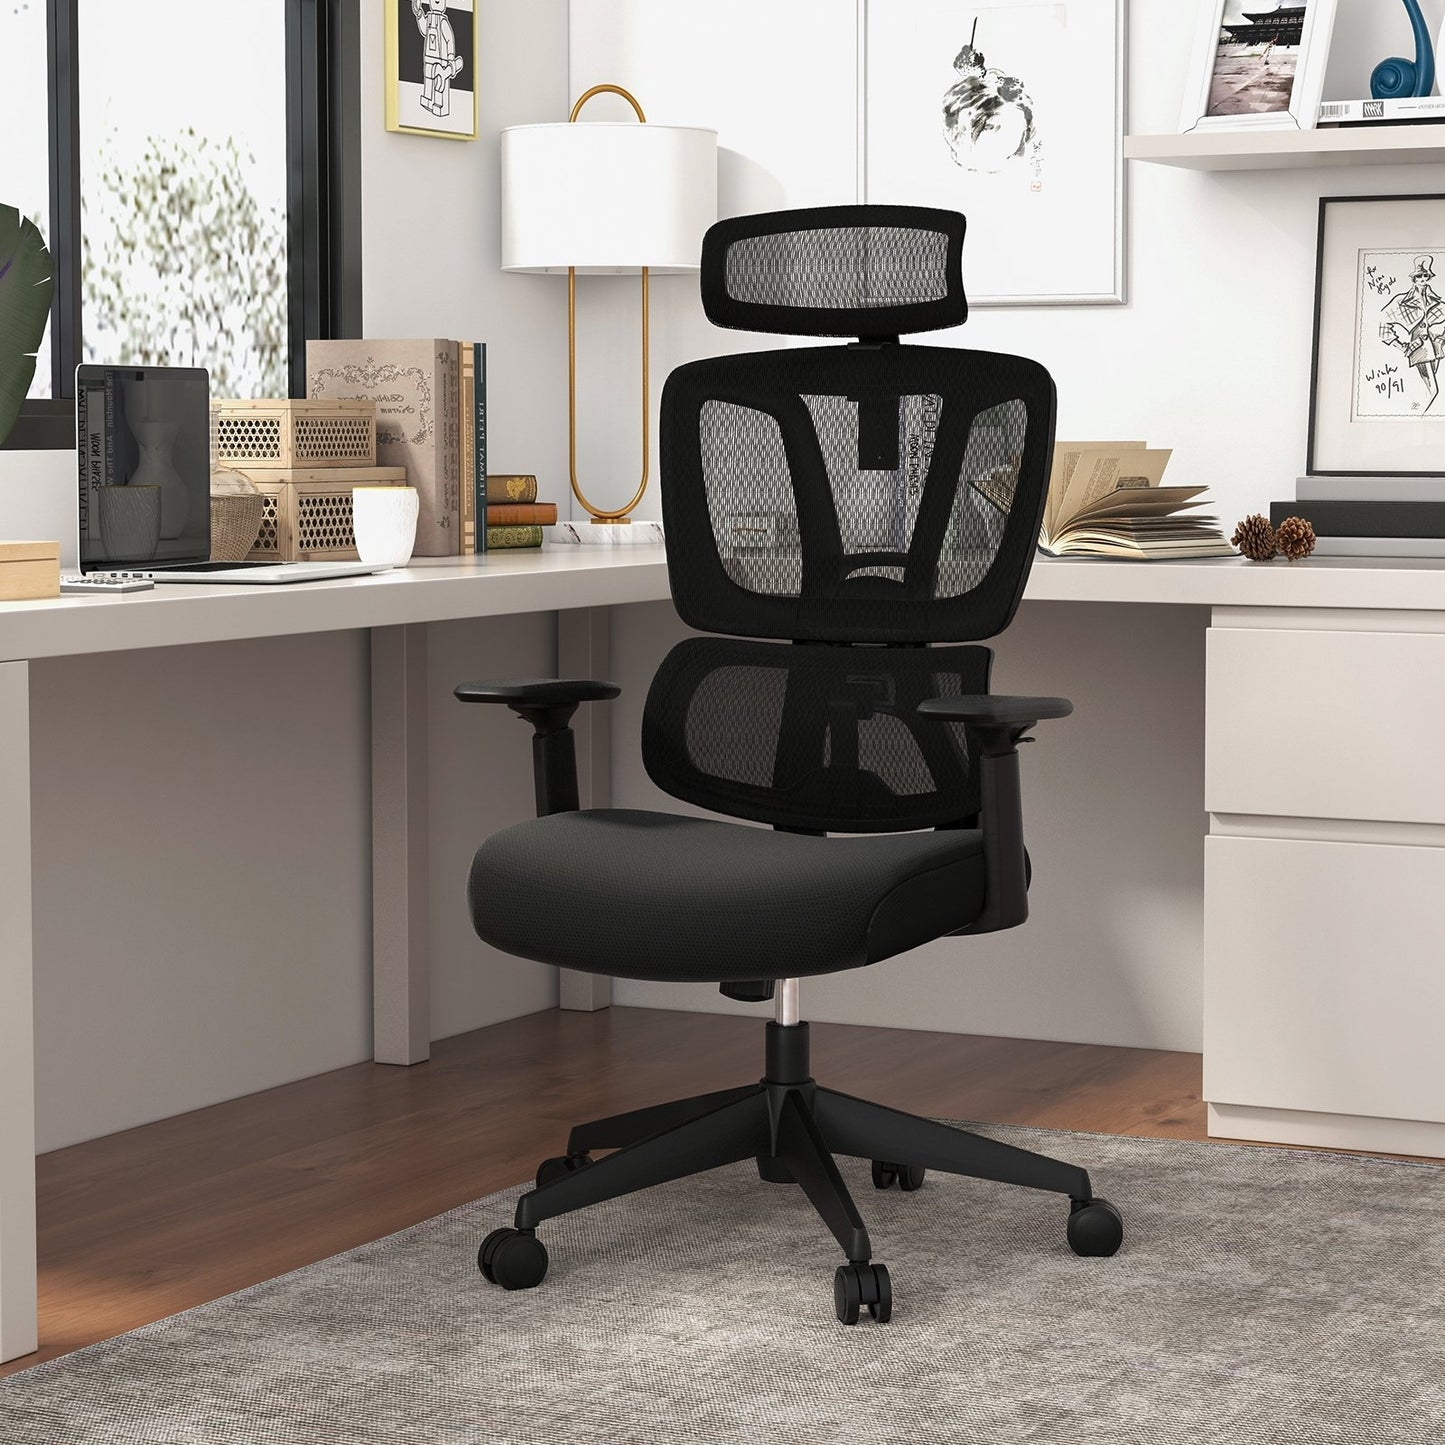 Ergonomic Office Chair with N Type Lumbar Support and Adjustable Headrest, Black